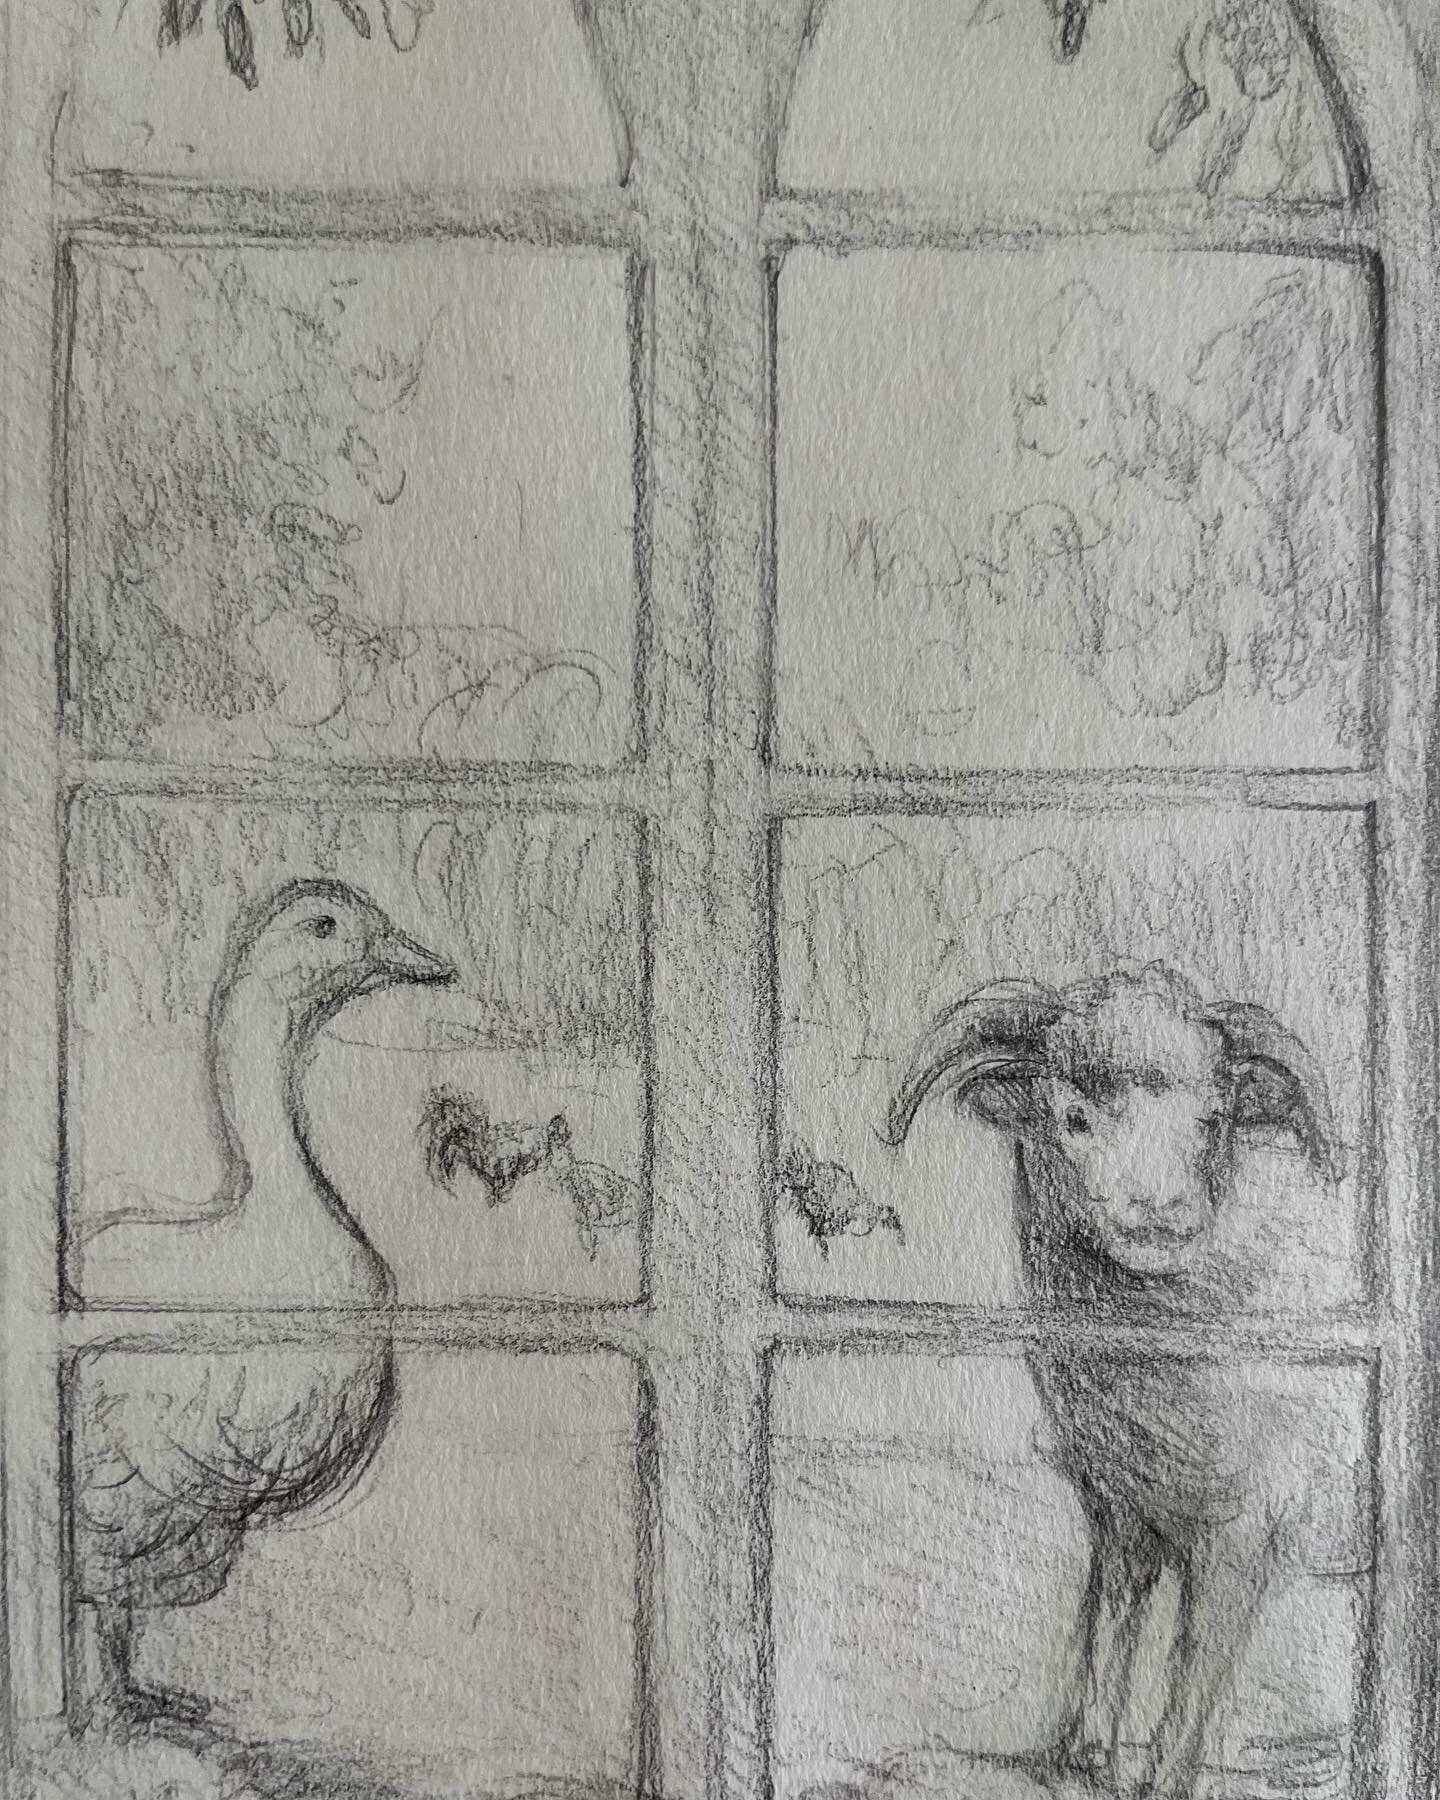 Detail from a recent commission pencil on tinted paper.Always fun to be asked to do something different! 🐑 🐓. #commission #pencil #pencildrawing #artist #goose #sheep #chicken